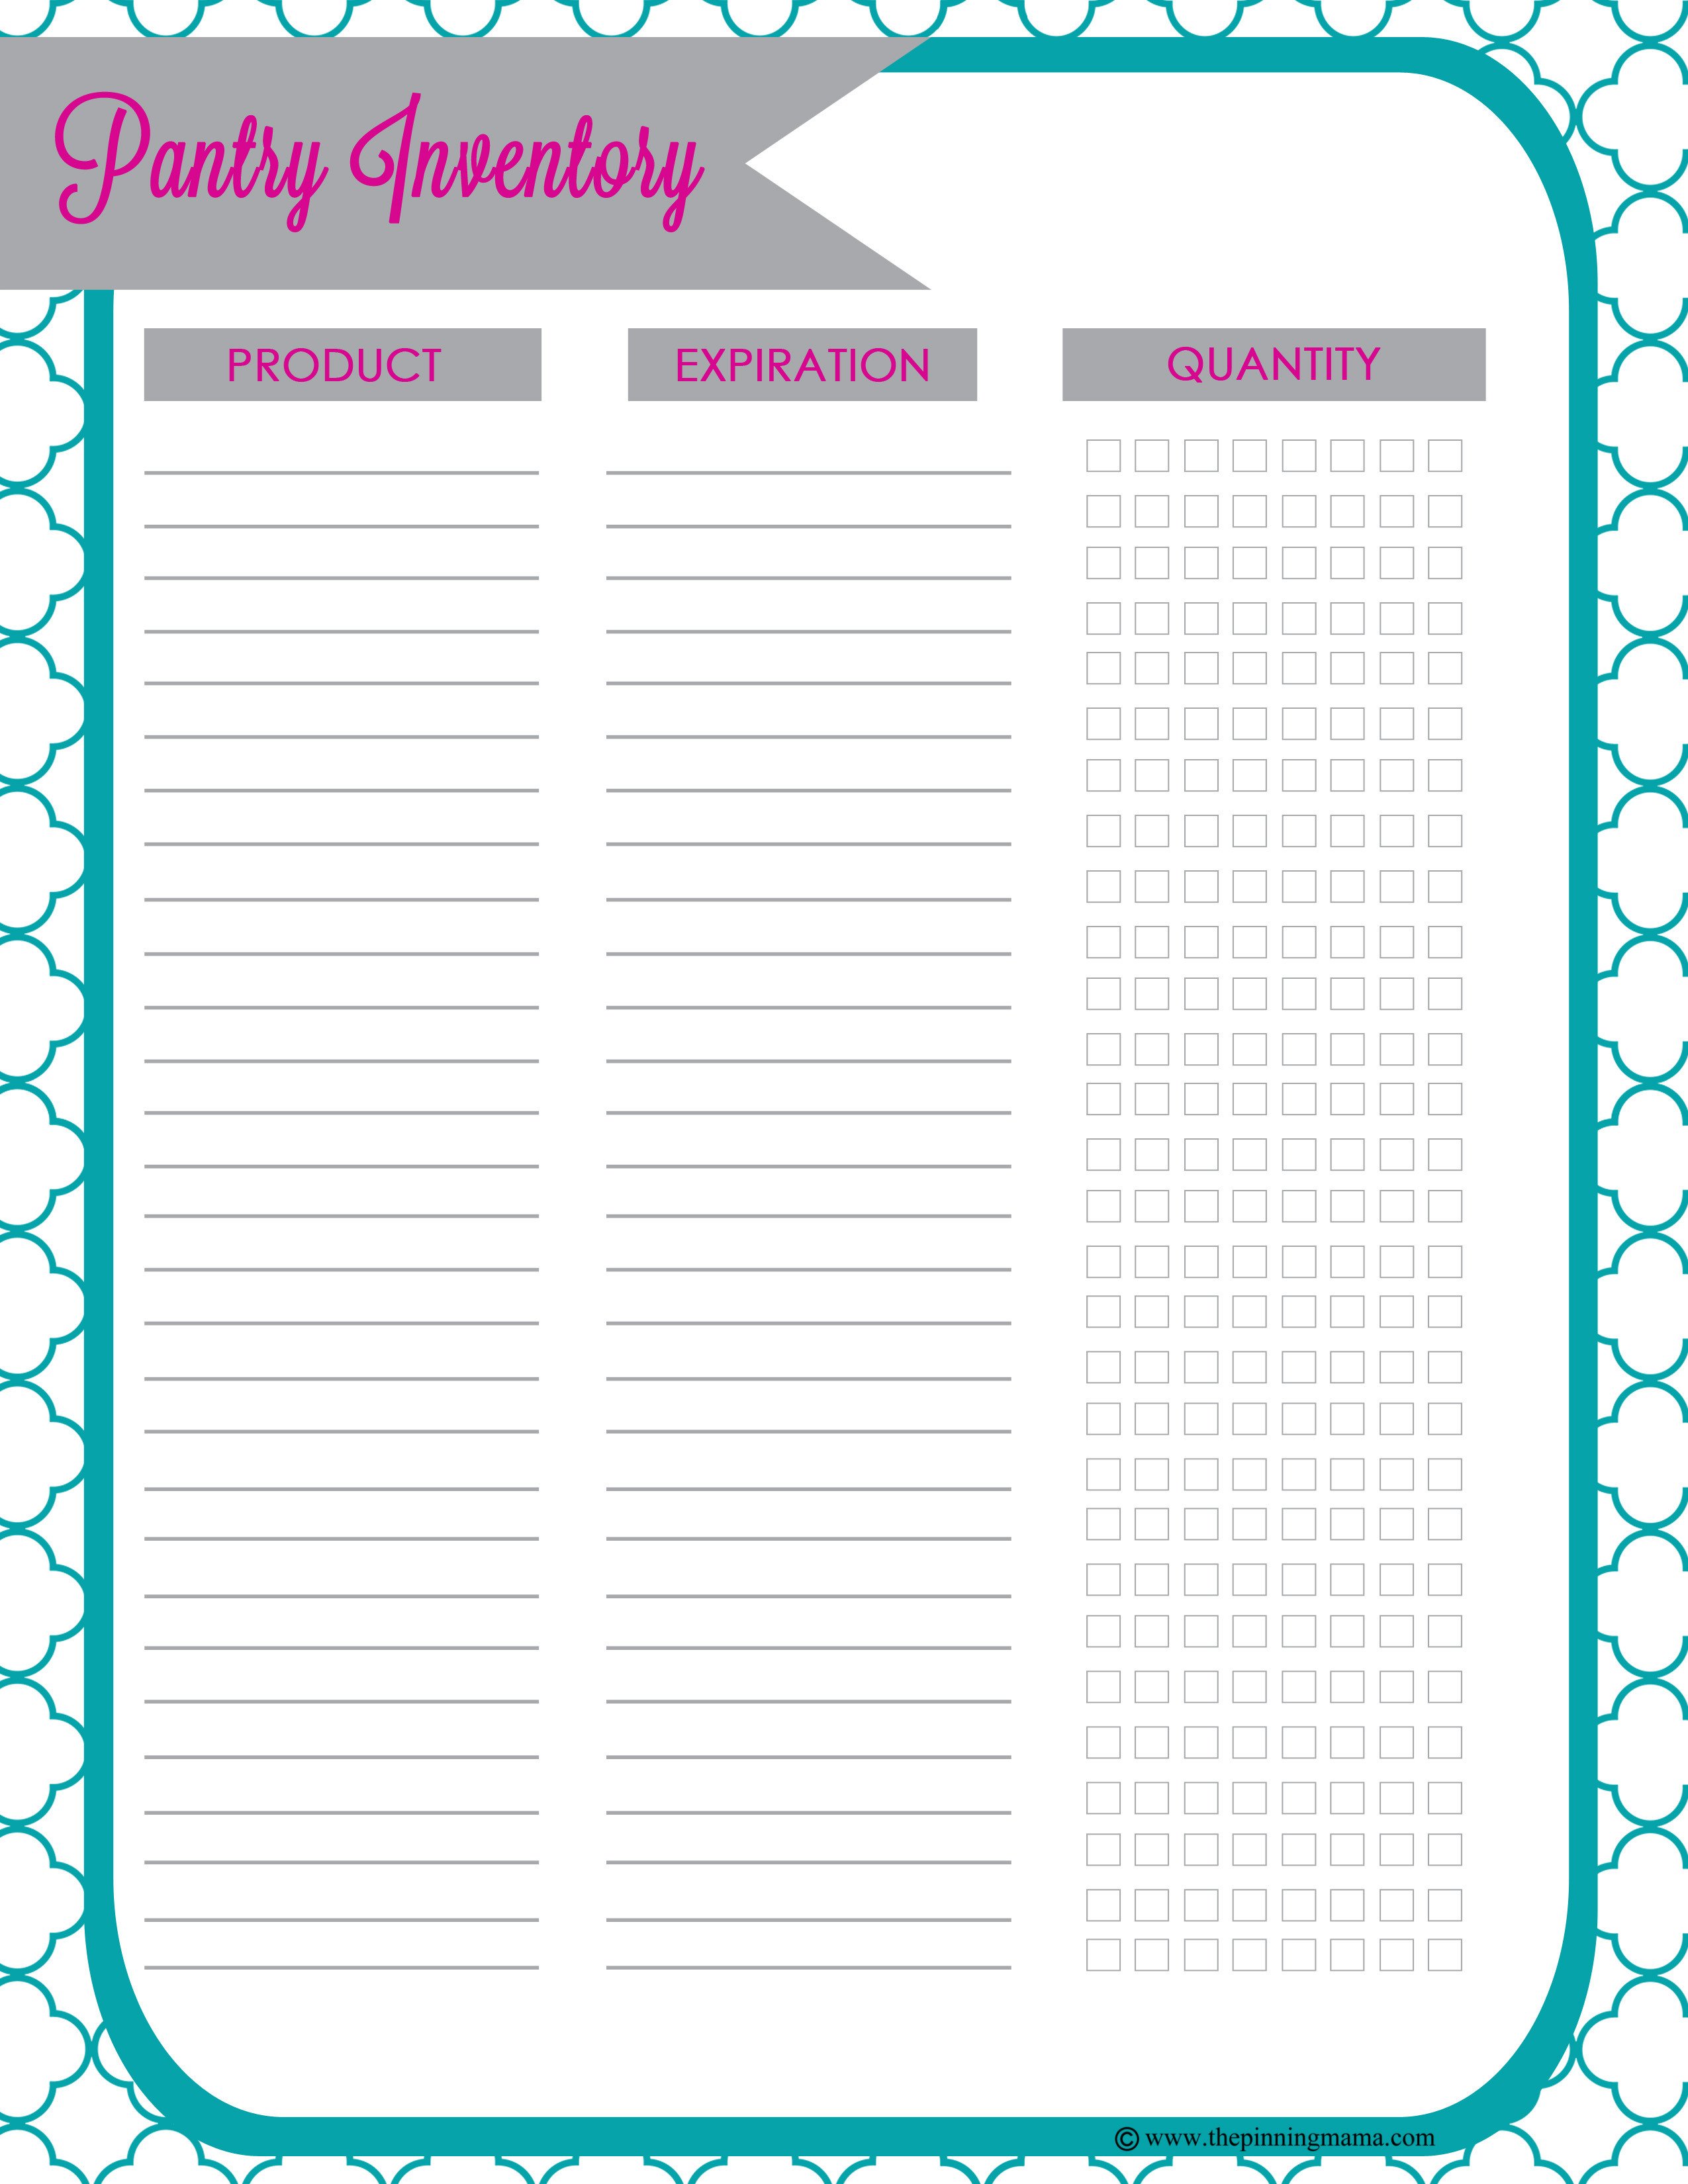 Food Inventory Sheet Printable 25 Printables for organizing Life after Laundry